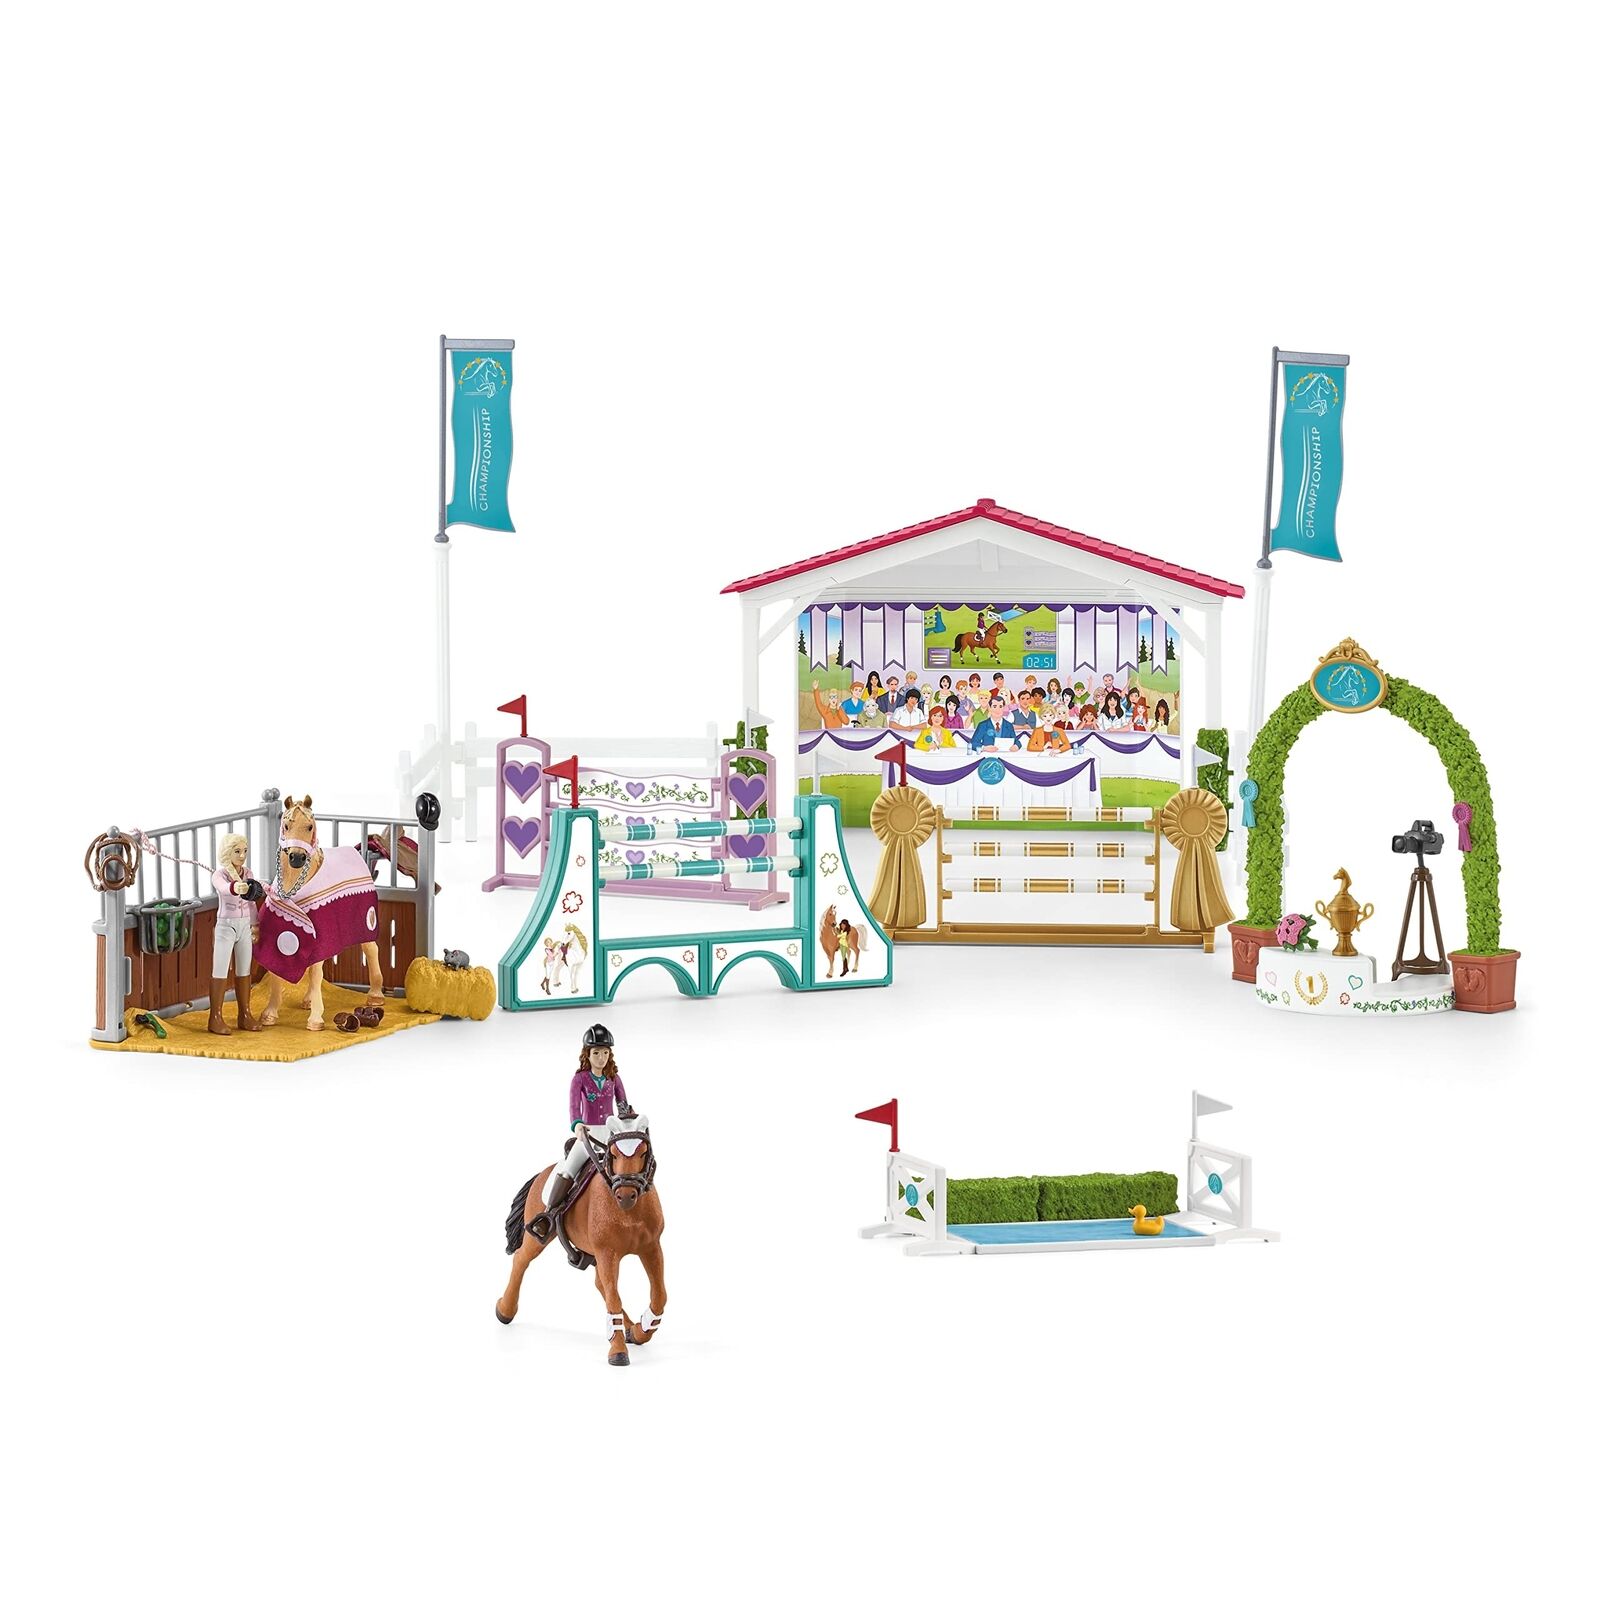 Schleich Horse Club, 36-Piece Playset, Horse Toys for Girls and Boys Ages 5-1...